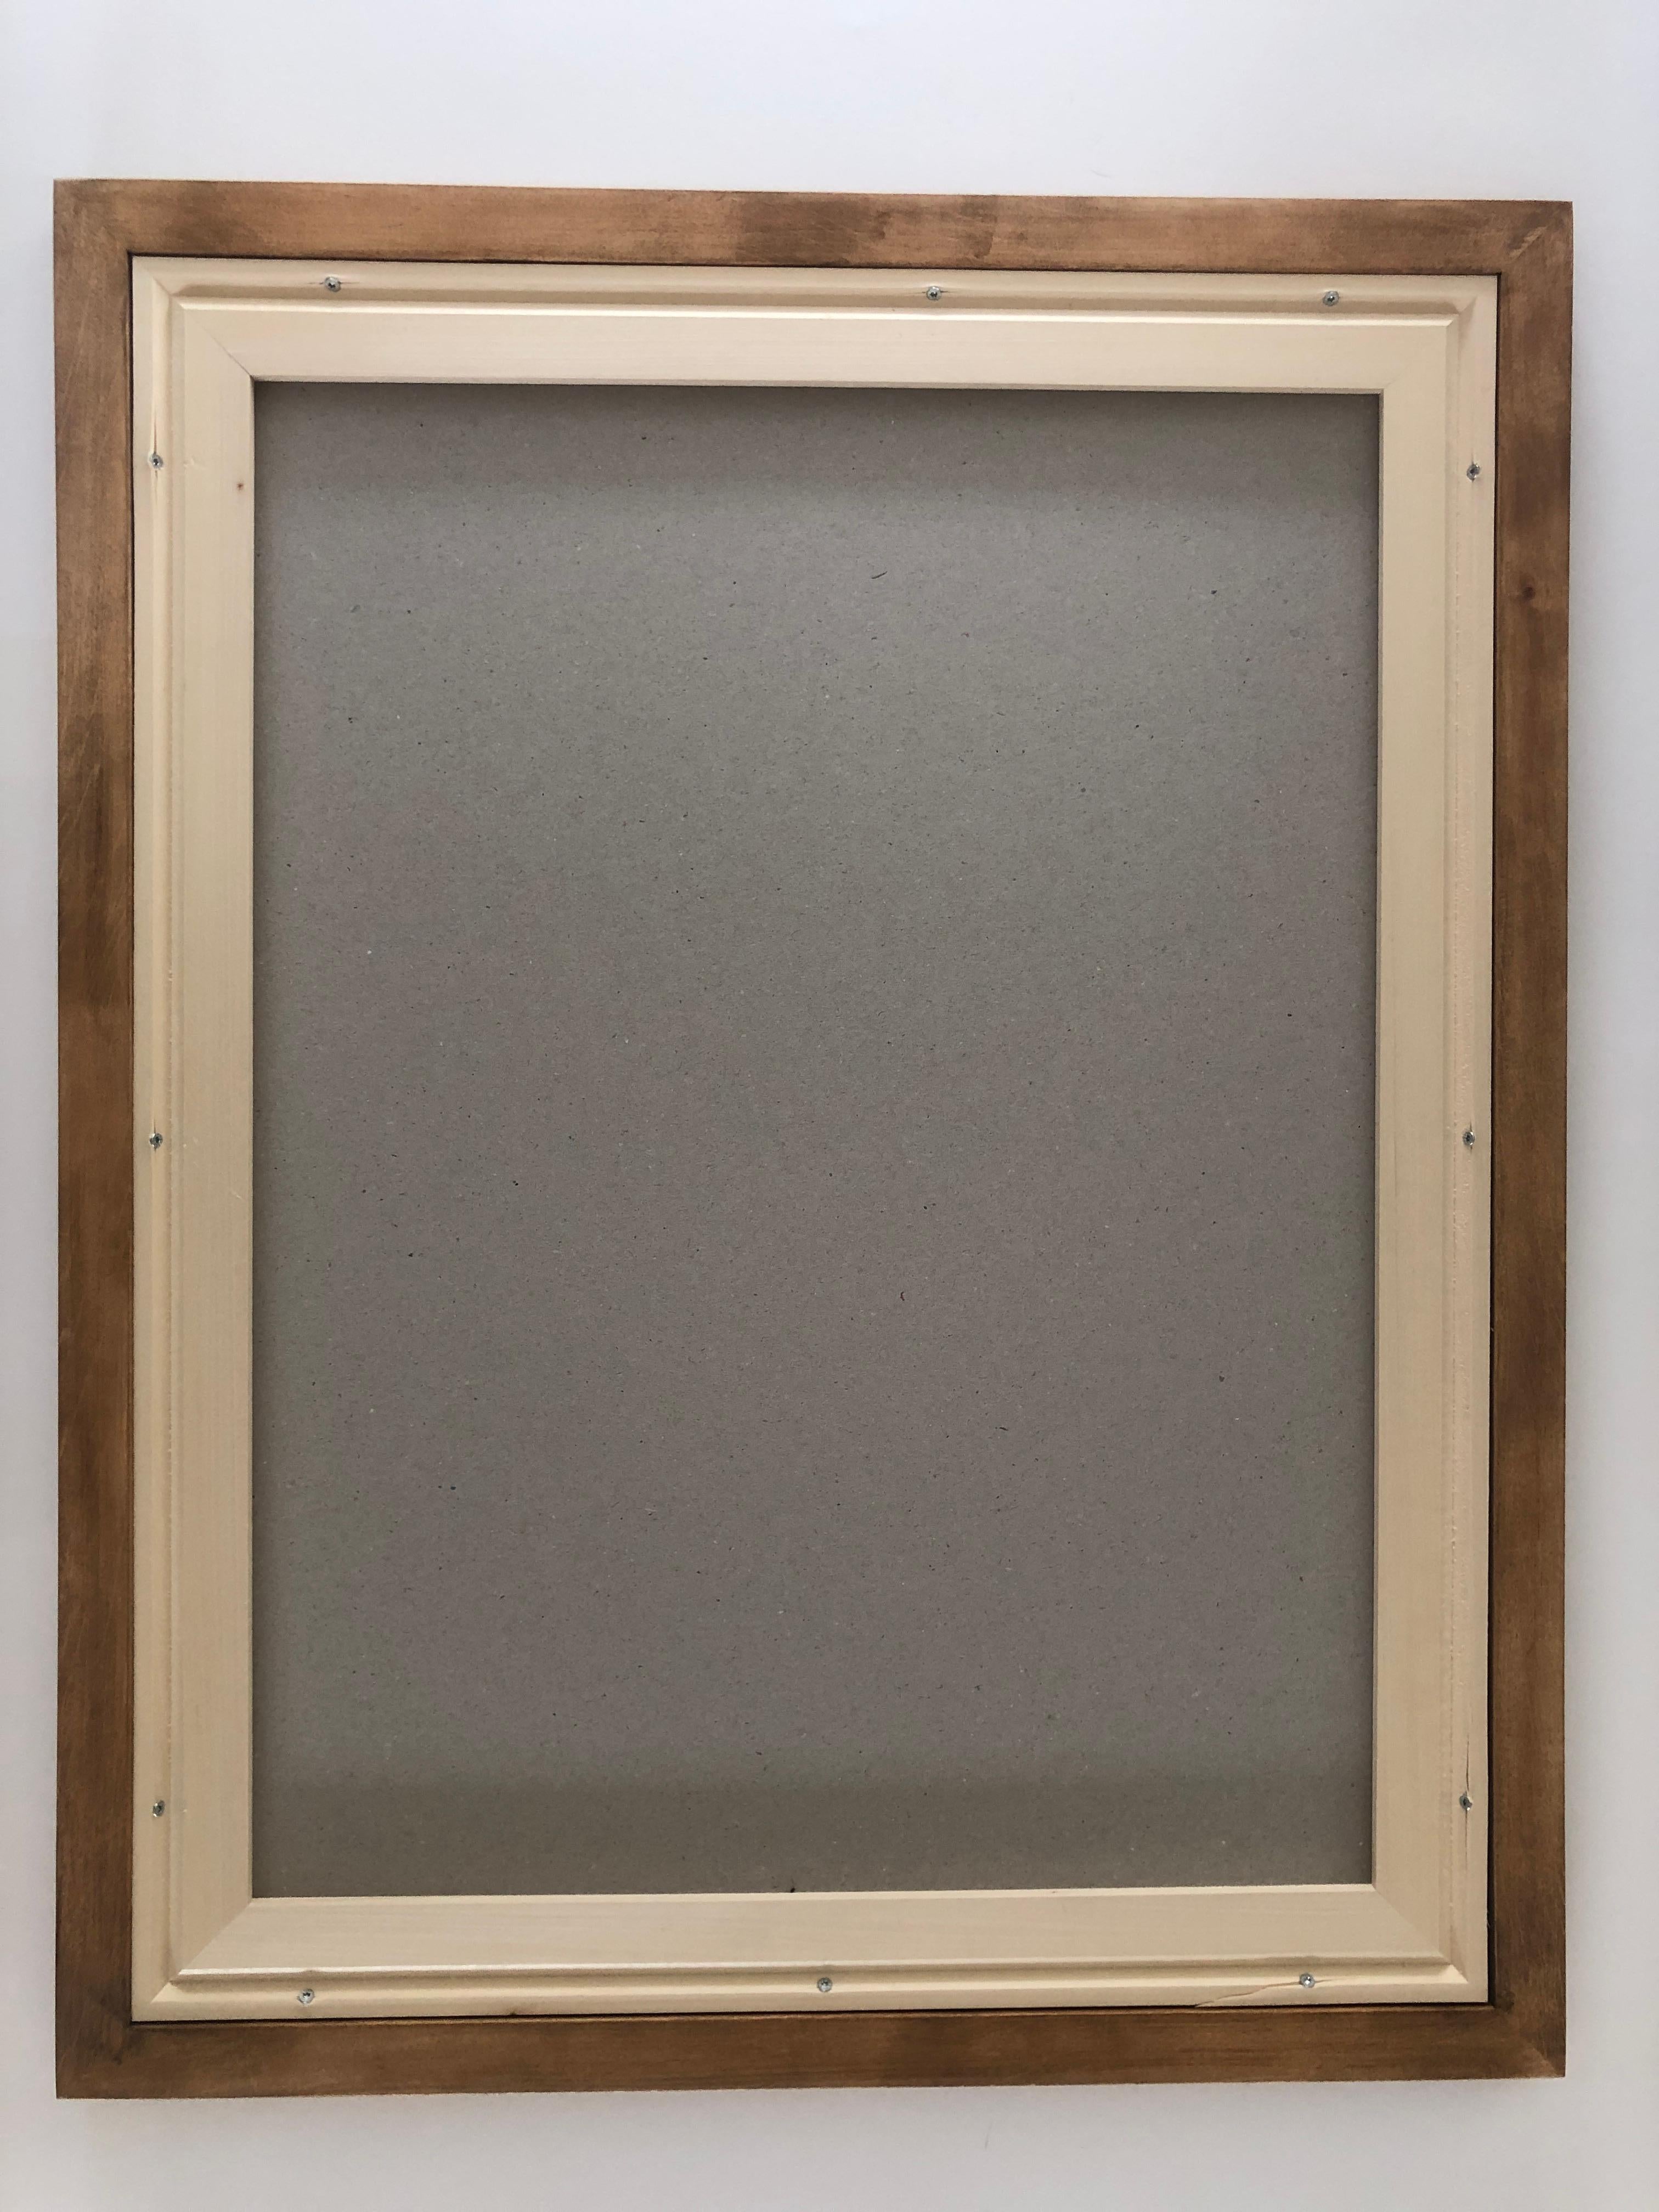 Contemporary Guillaume Cornelis van Beverloo 'Corneille', Signed Lithograph, Wooden Frame For Sale